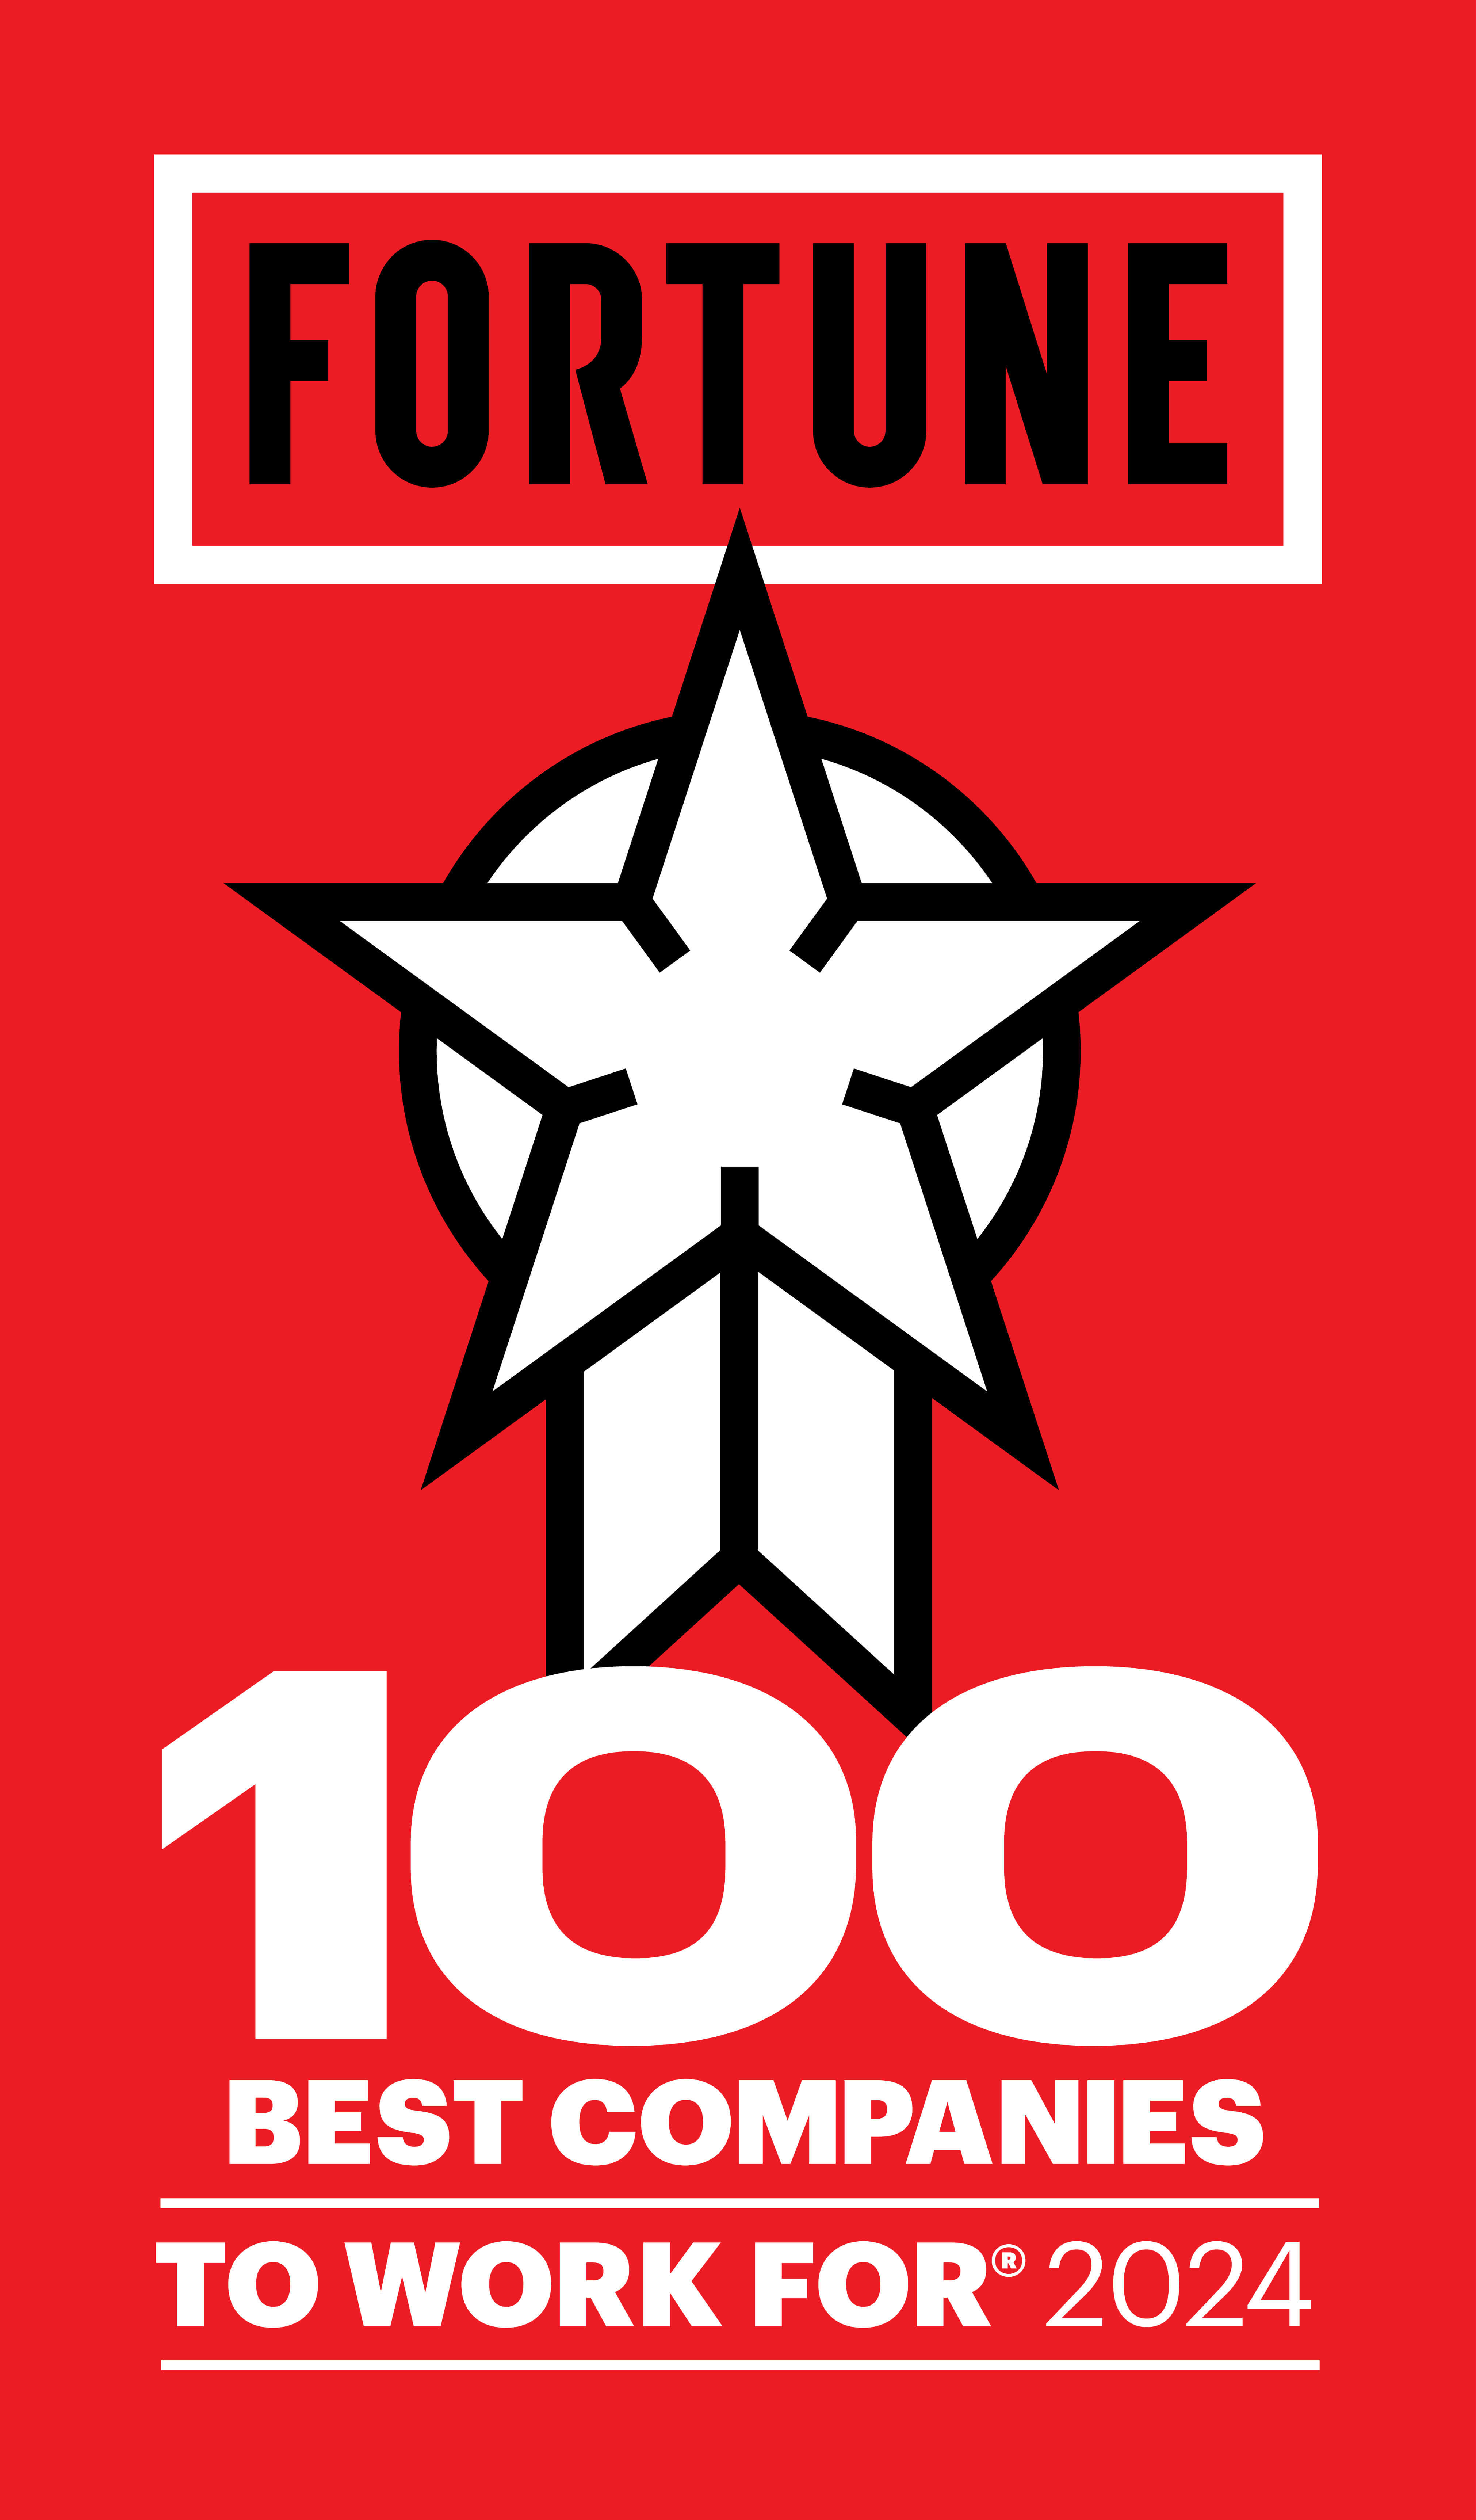 Fortune 100 Best Companies to Work for 2024 Logo